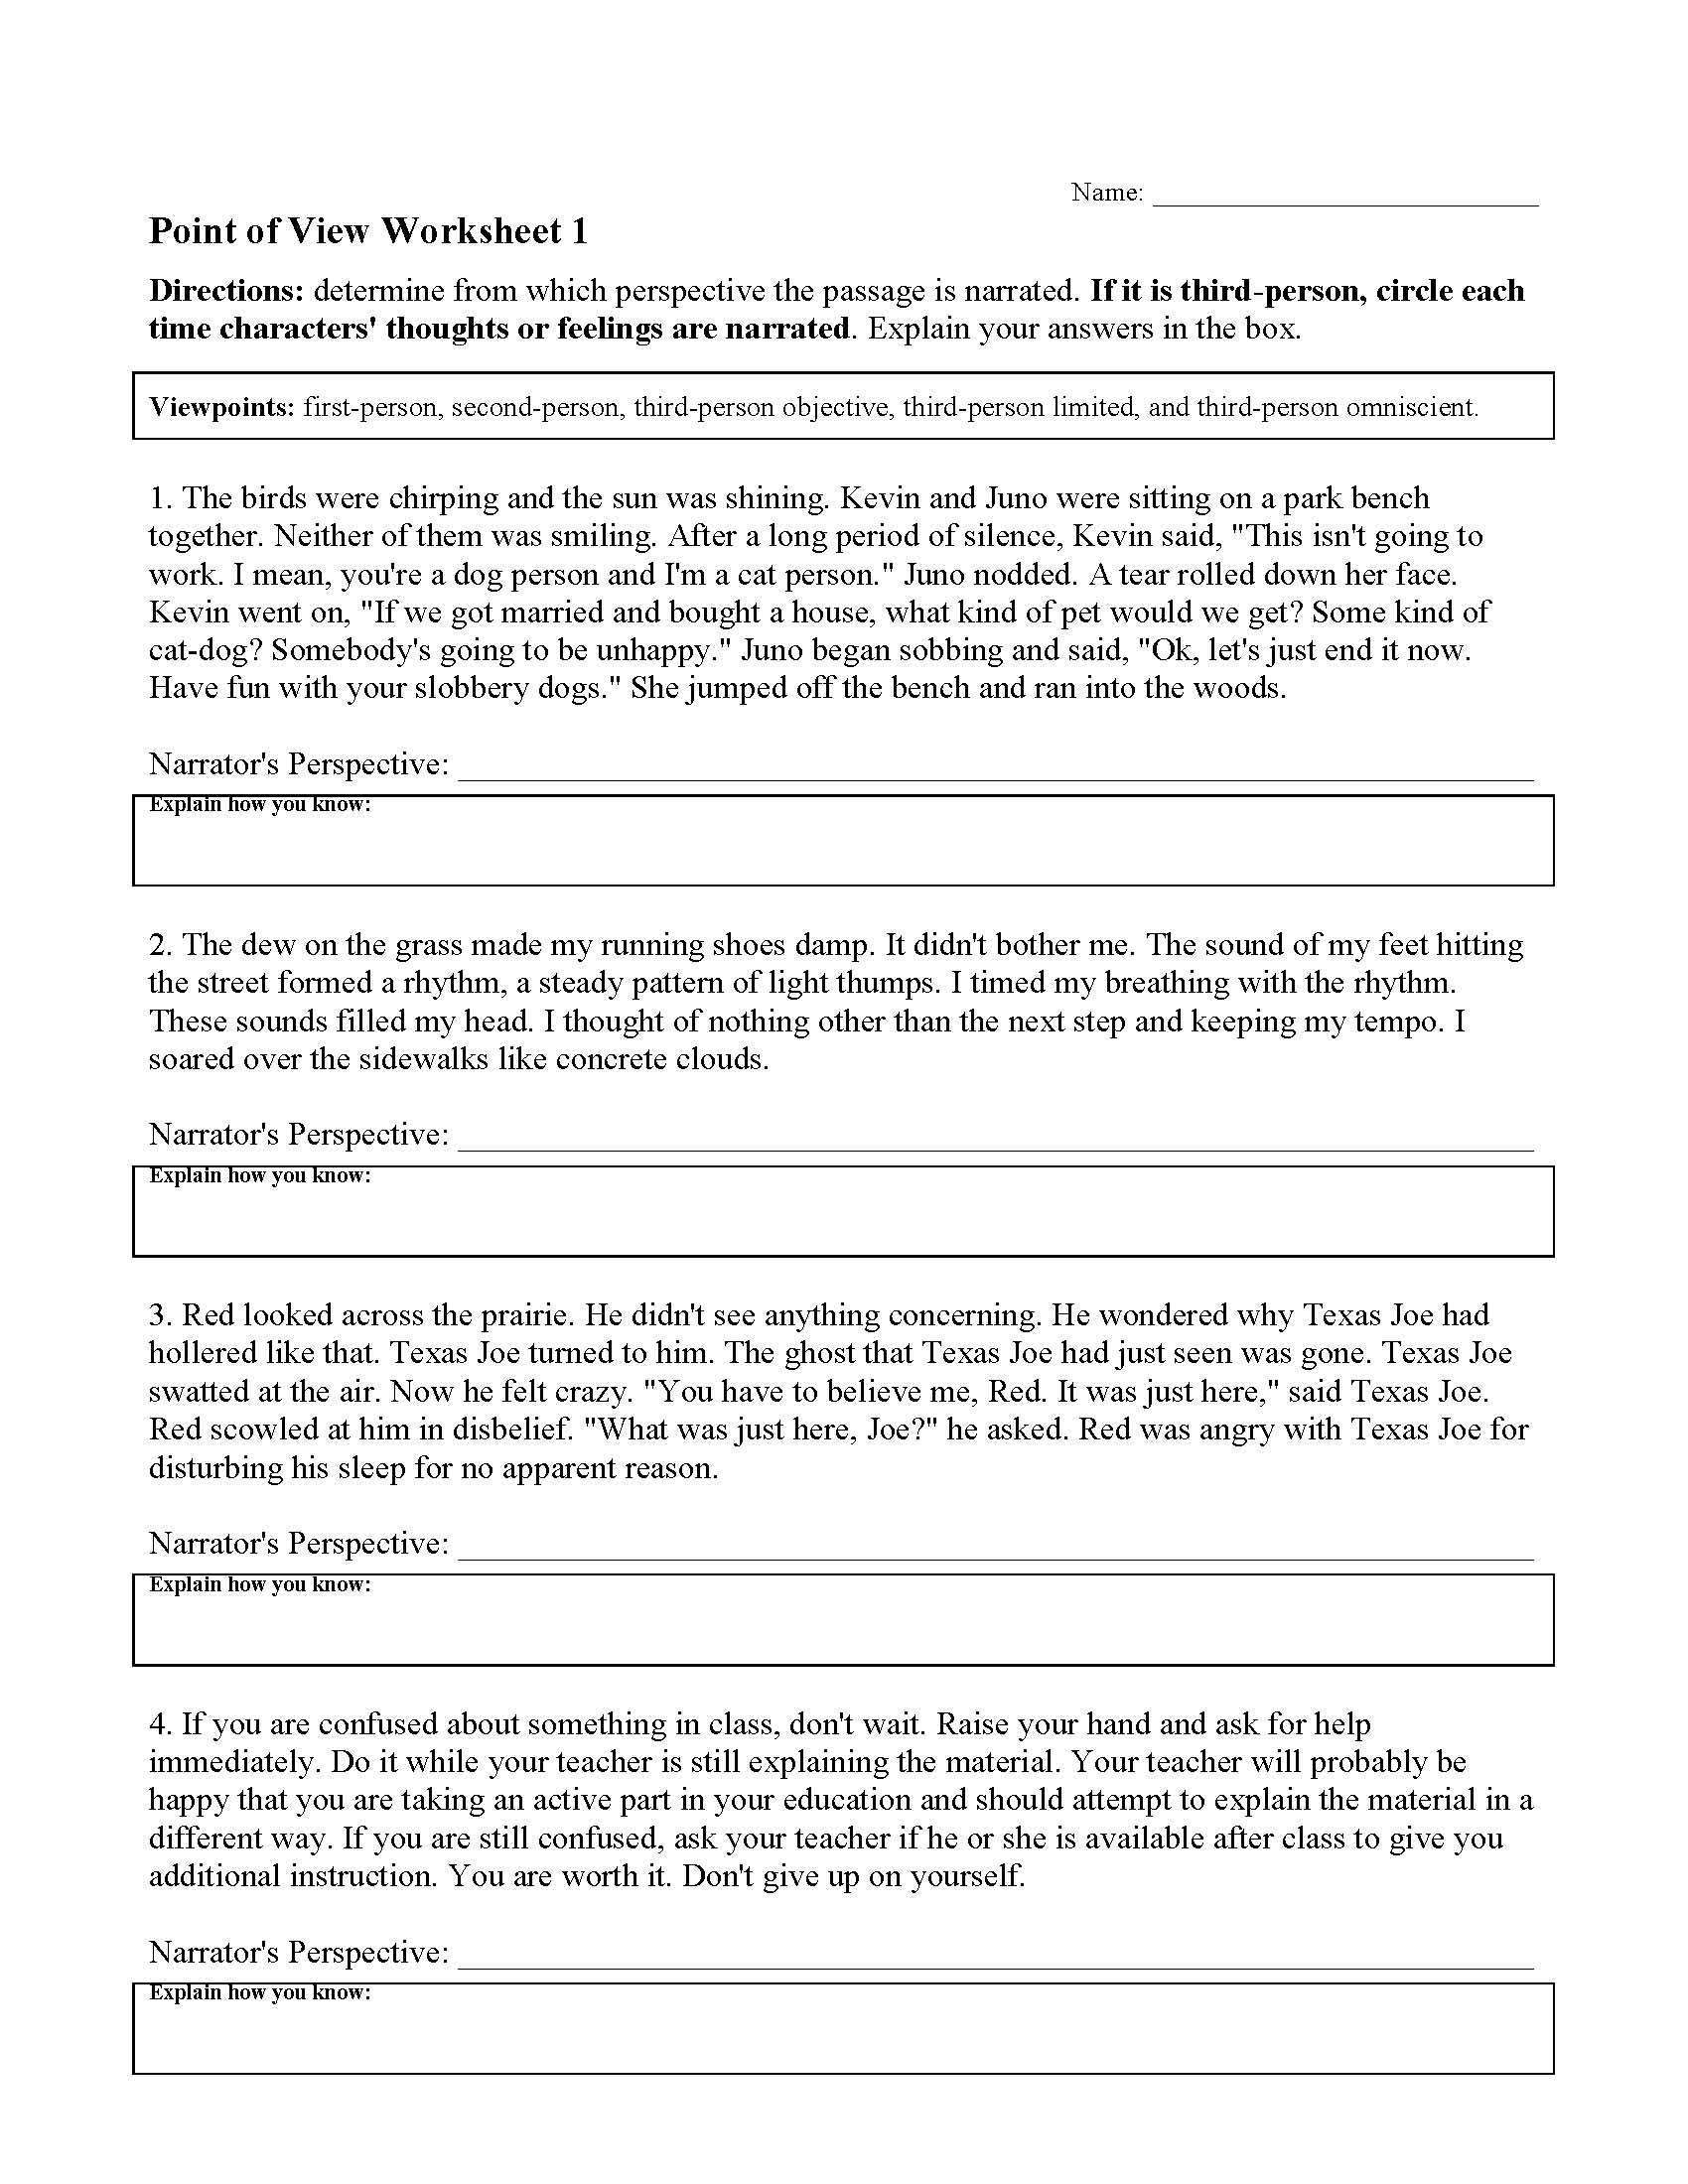 point-of-view-worksheet-3rd-grade